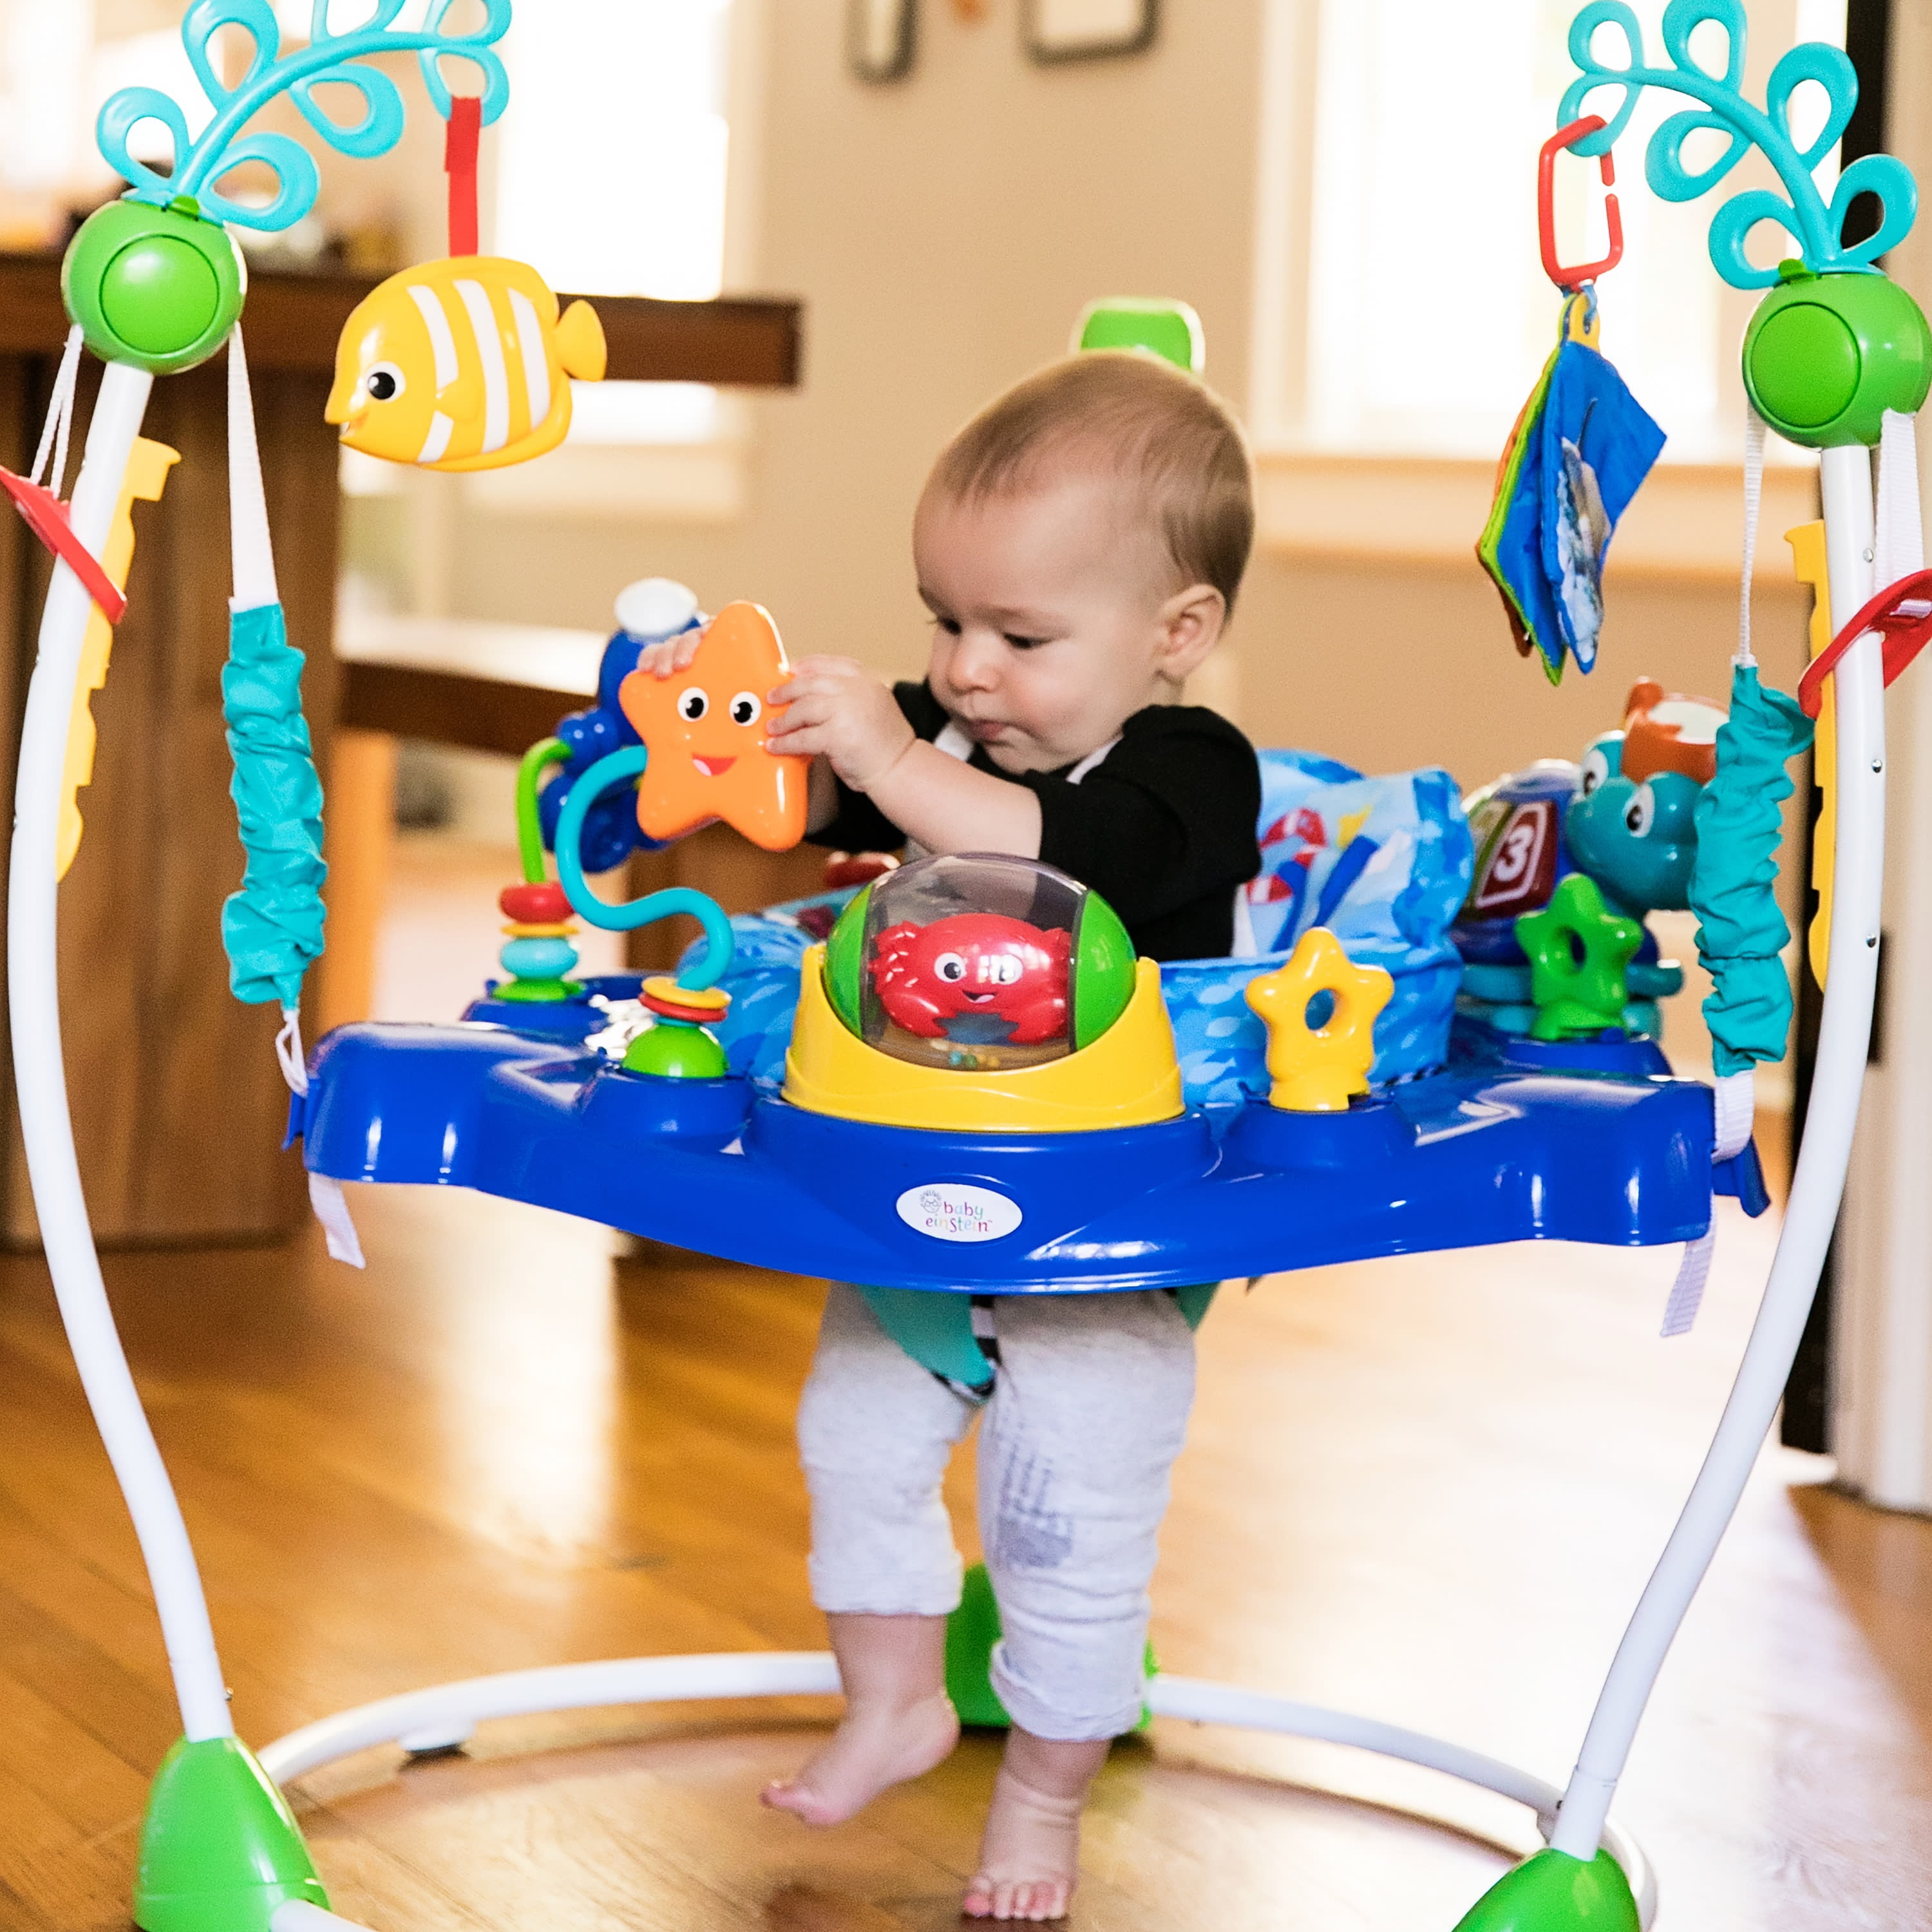 Entertainment and Developmental Jumper Baby Jumper Infant Bouncer Walker Rocking chiar Baby cardle Xiangtat Baby Neptune's Ocean Discovery Jumper Leaning Foldable Baby Activity 